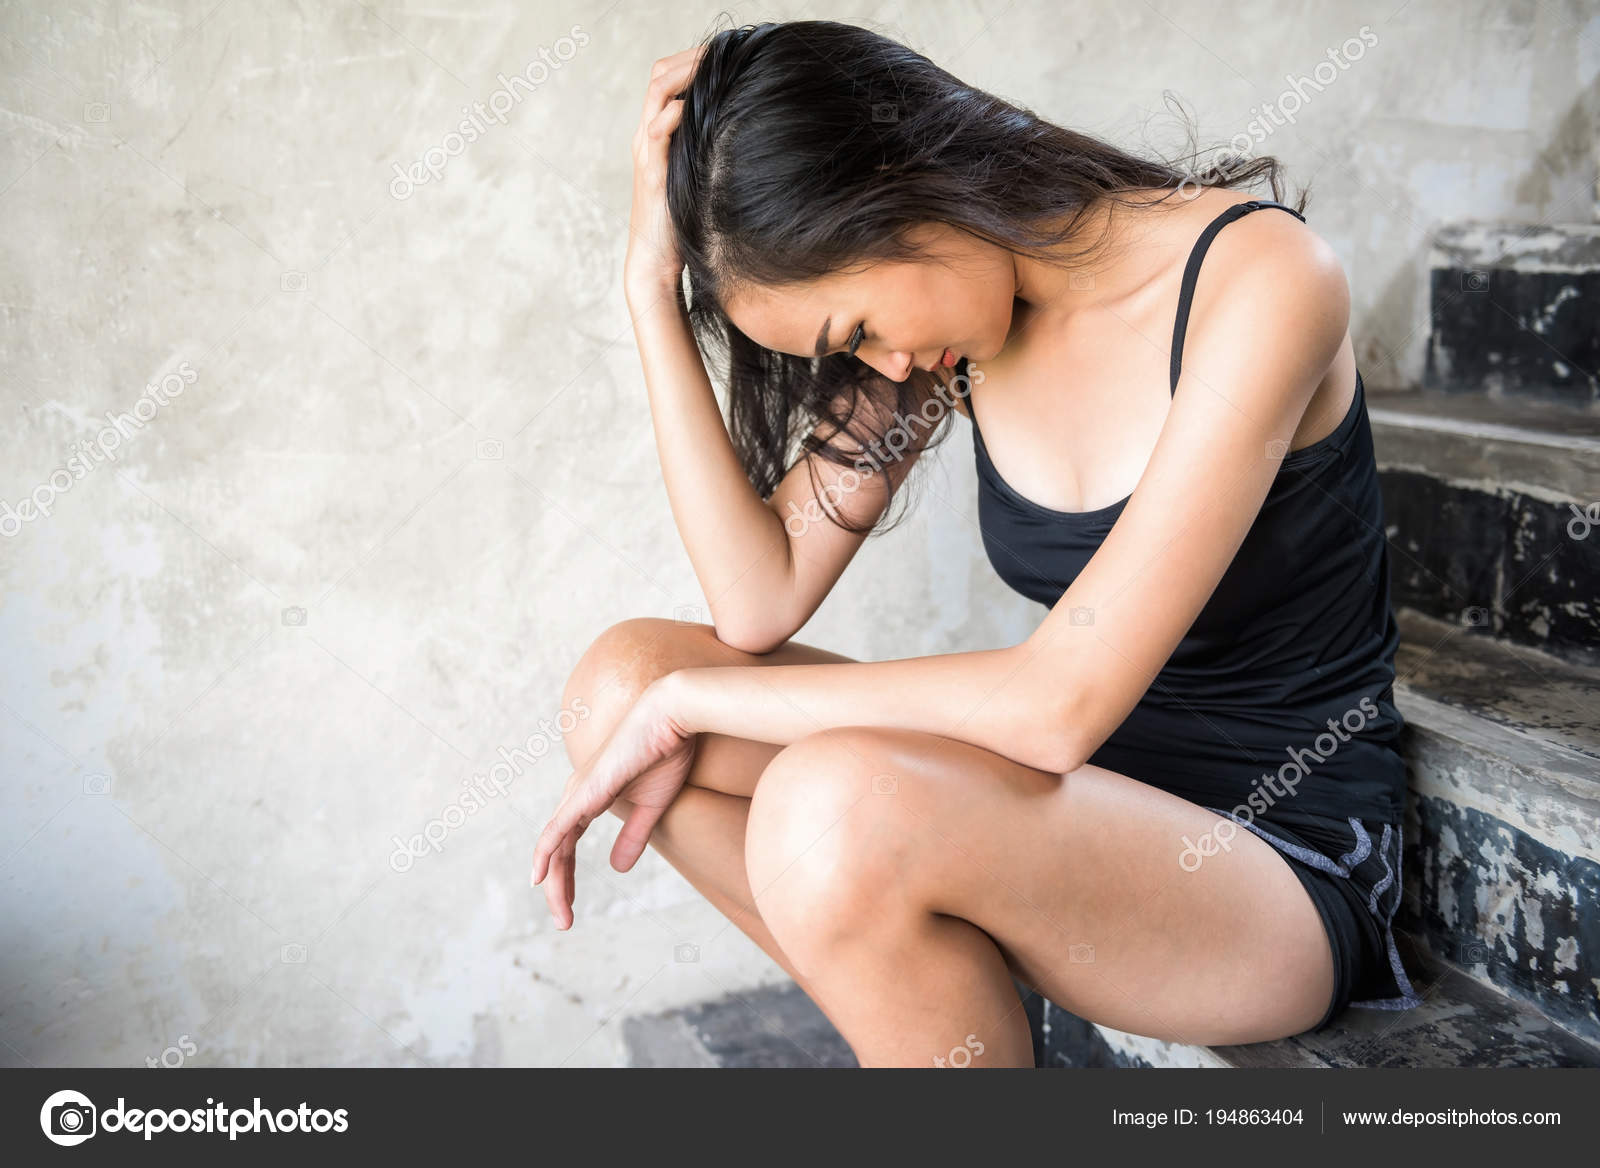 Depressed prostitute Asian woman in brothel Stock Photo by ©blanscape 194863404 pic